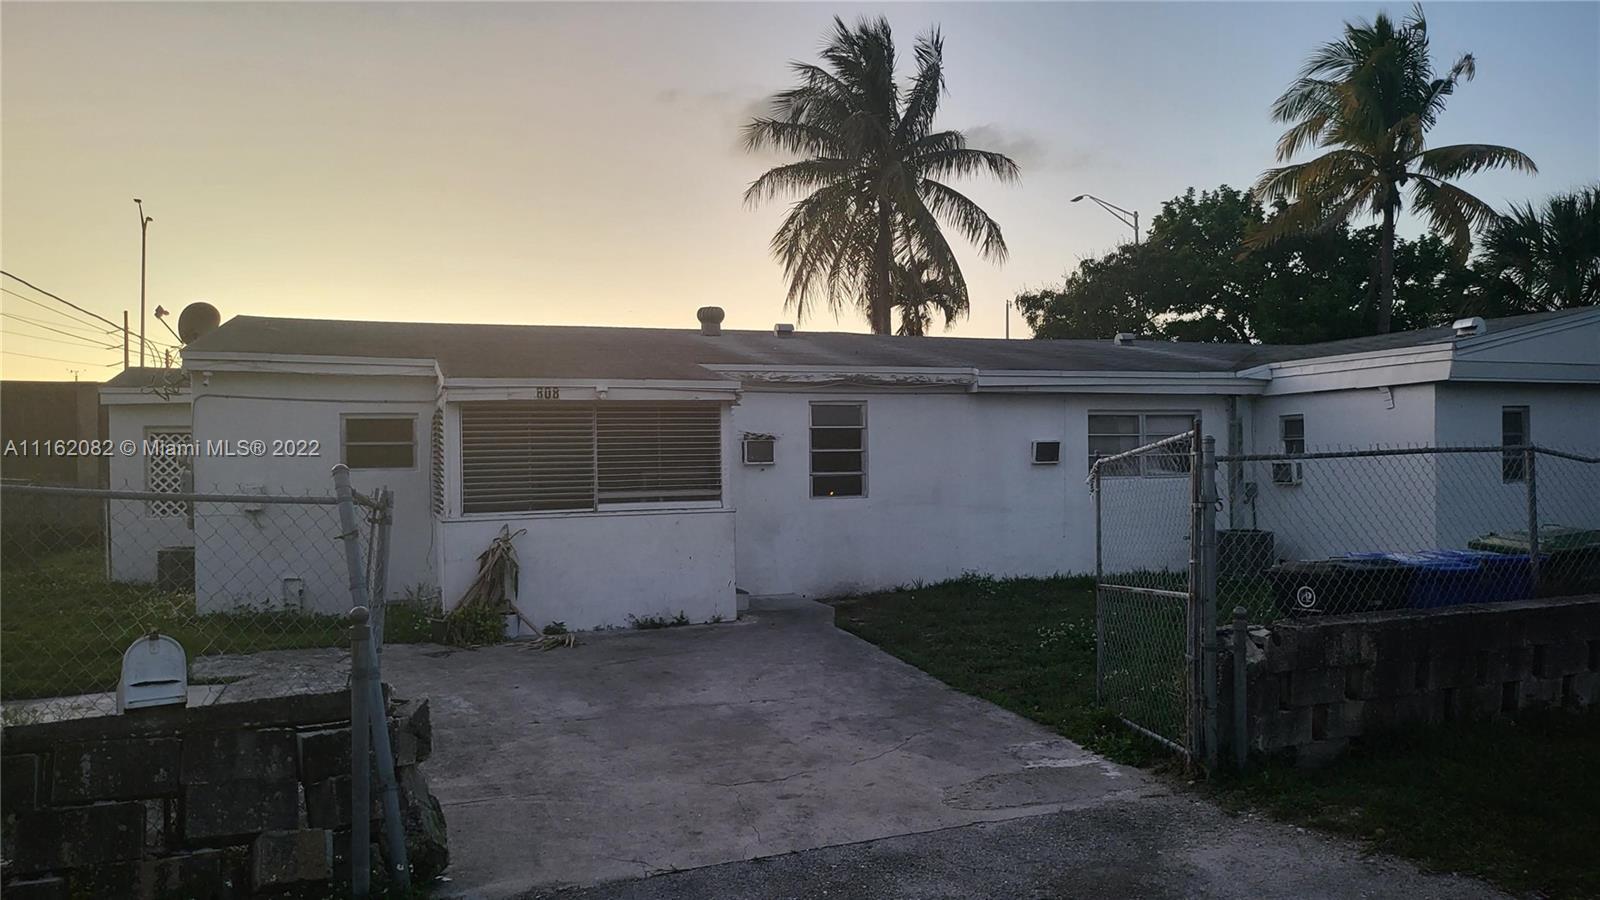 Self standing house east of I95 near Fort Lauderdale building department 6 rooms , 2 bath plus laund